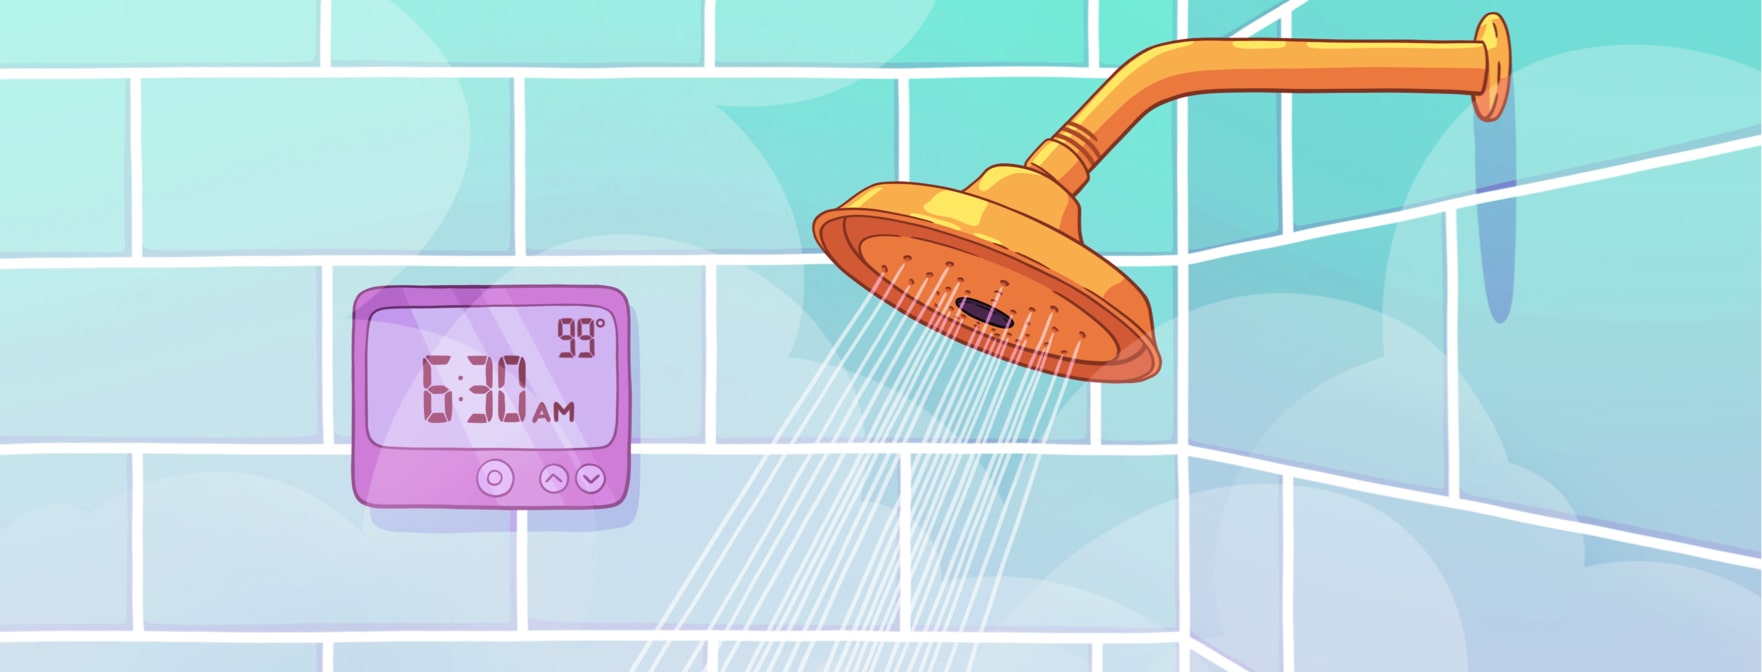 Does Taking a Long Shower Affect Your Psoriasis? image